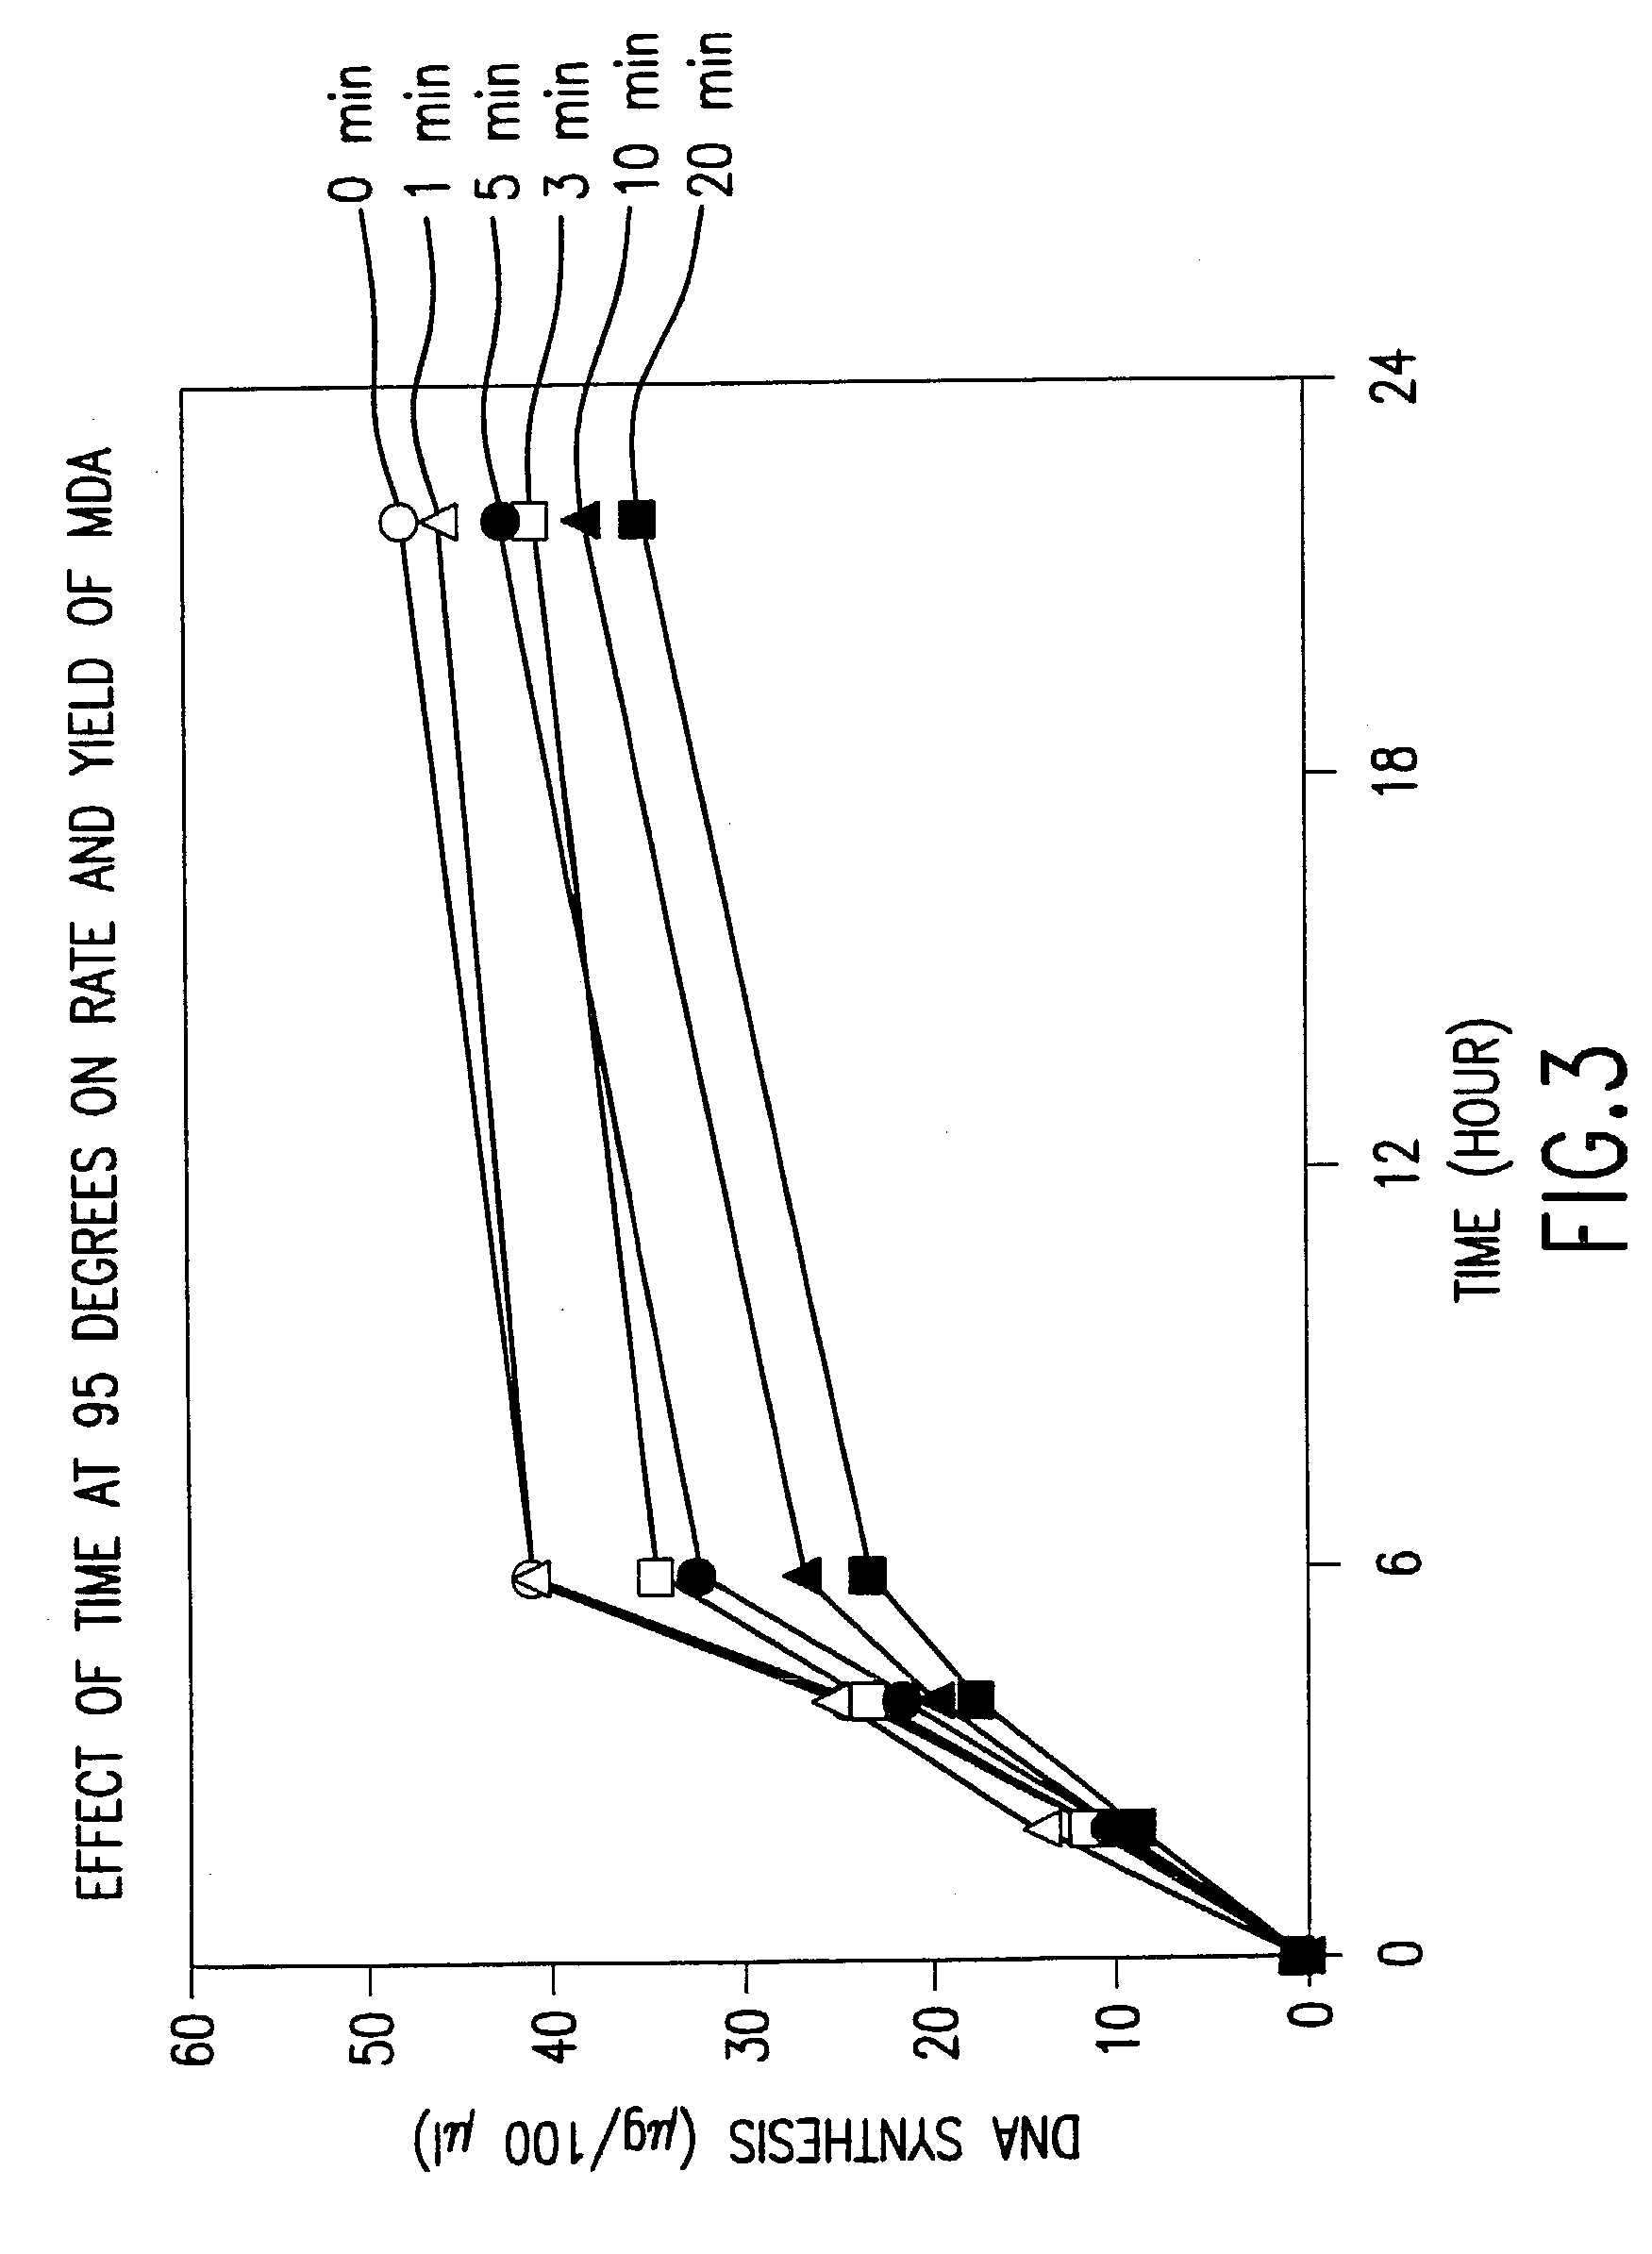 Method for nucleic acid amplification that results in low amplification bias